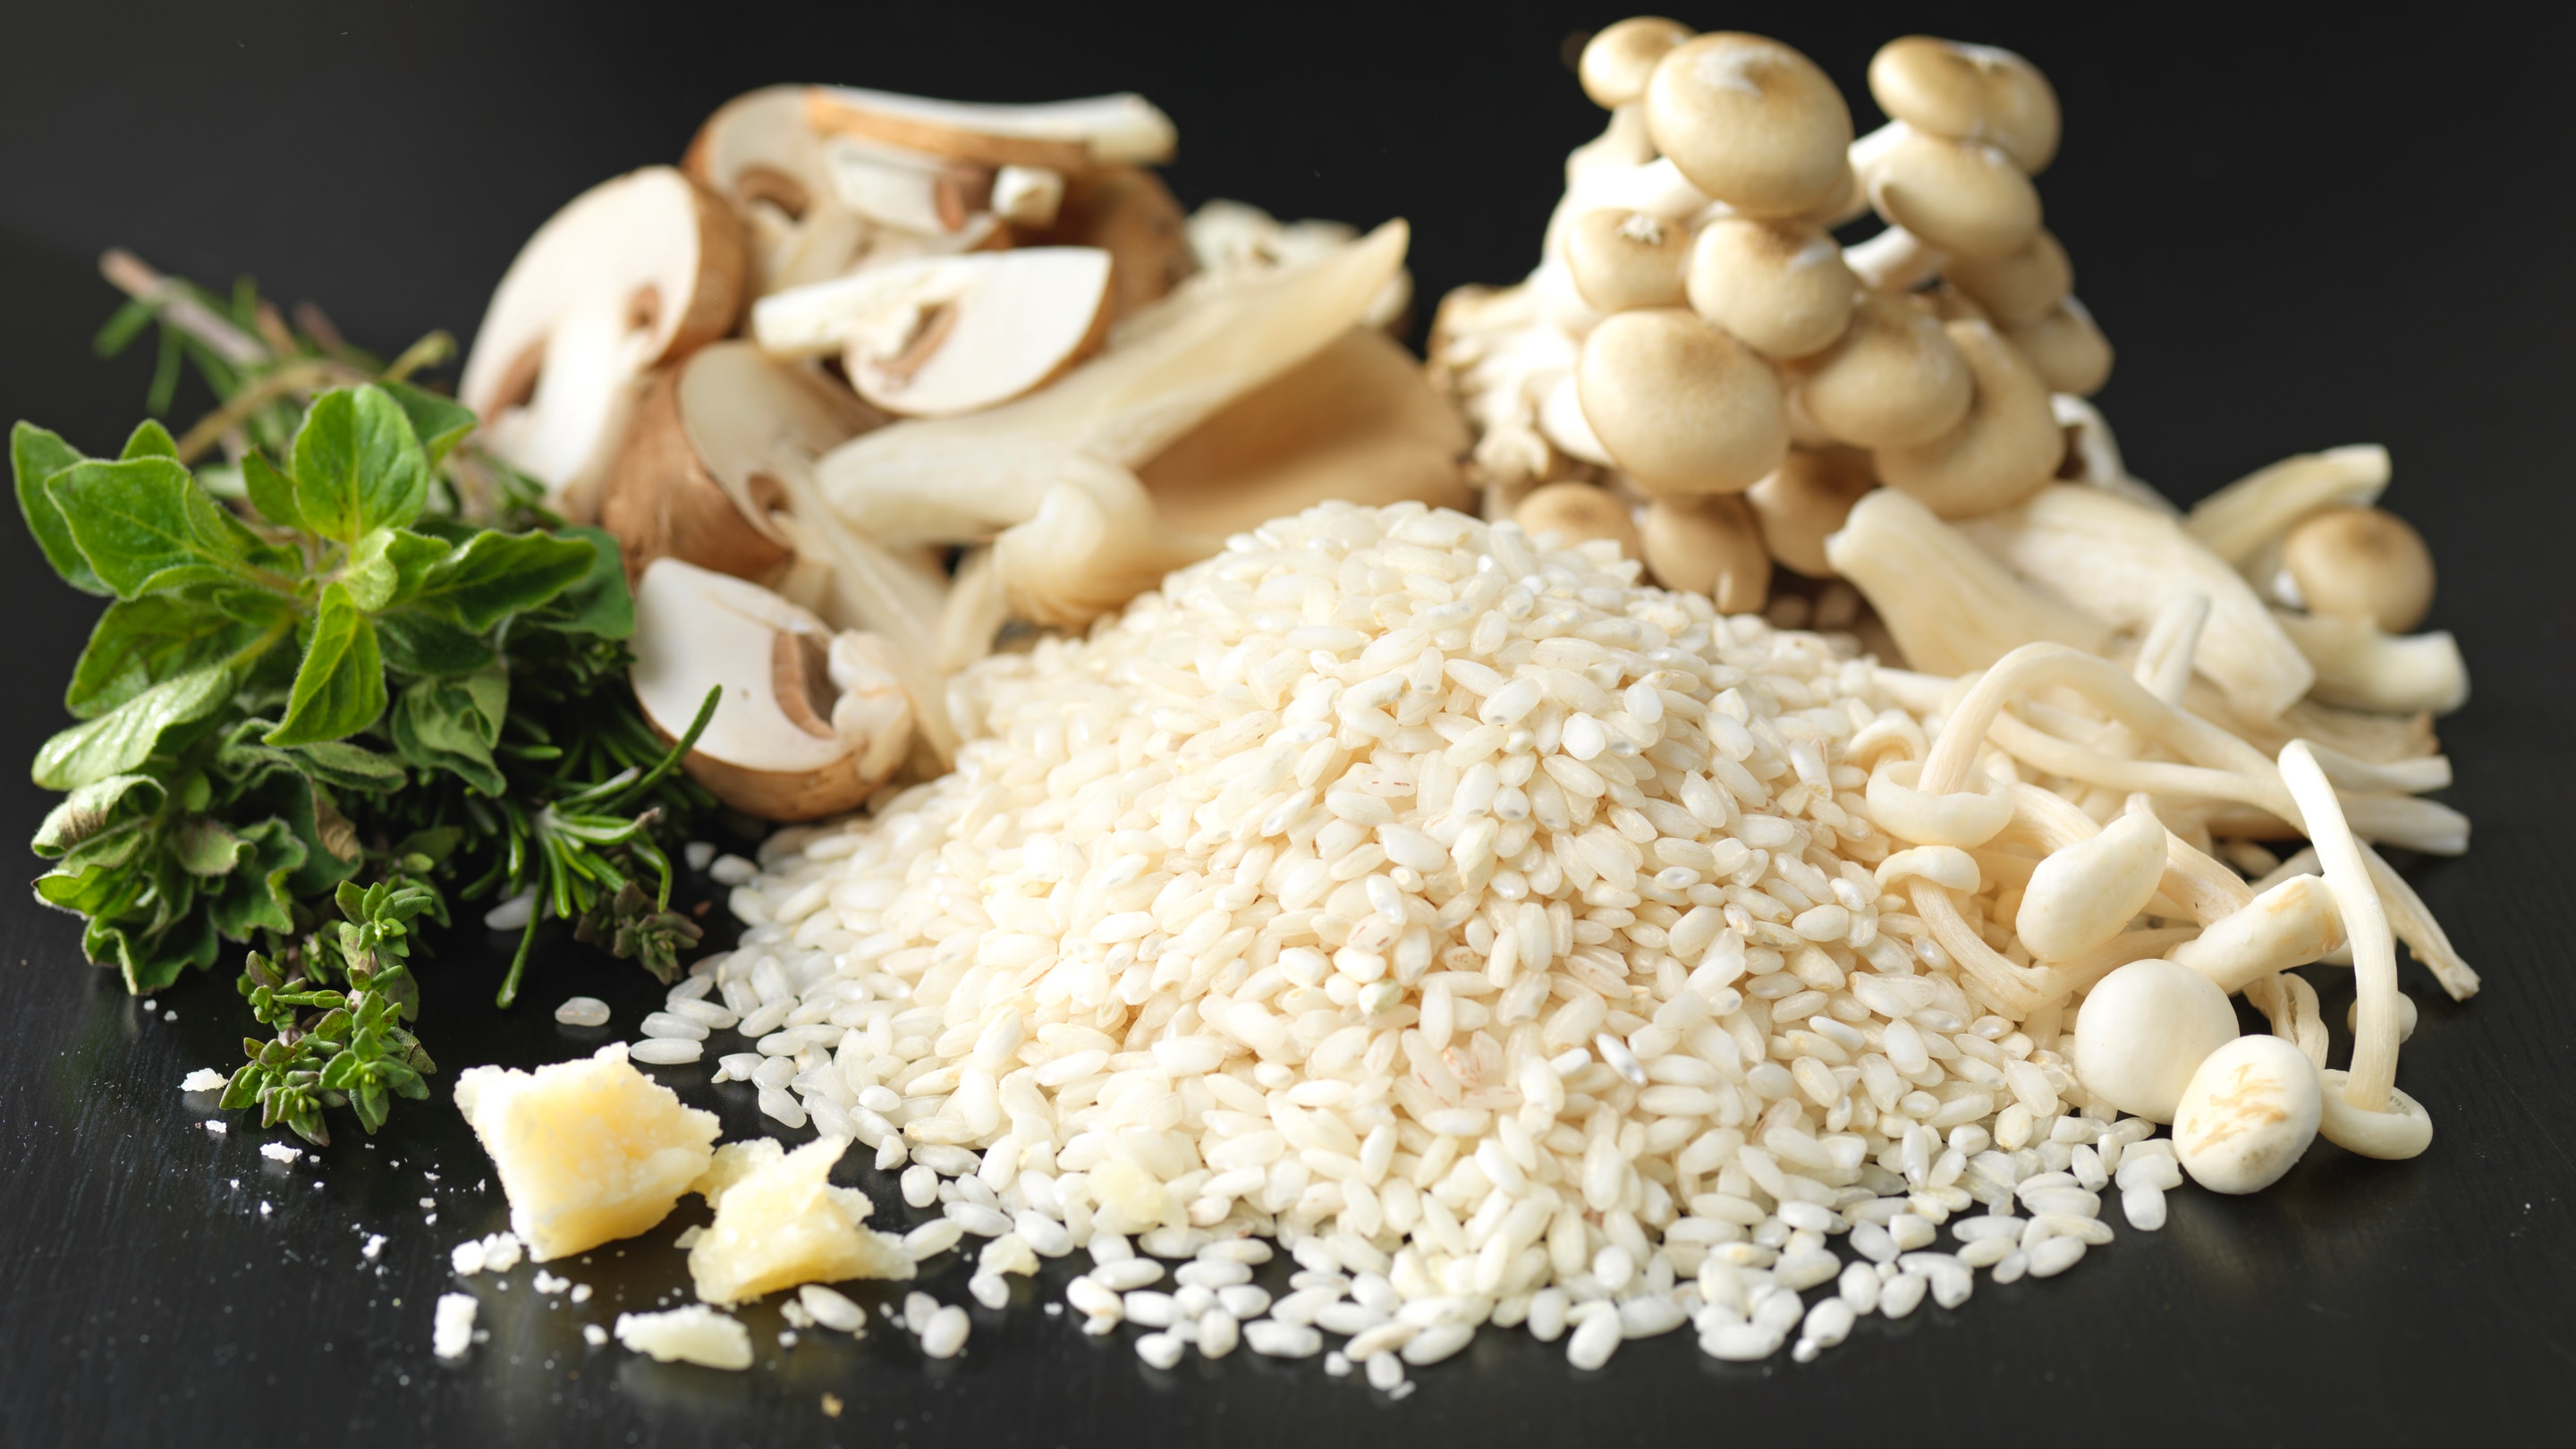 Raw ingredients for risotto - rice & mushrooms